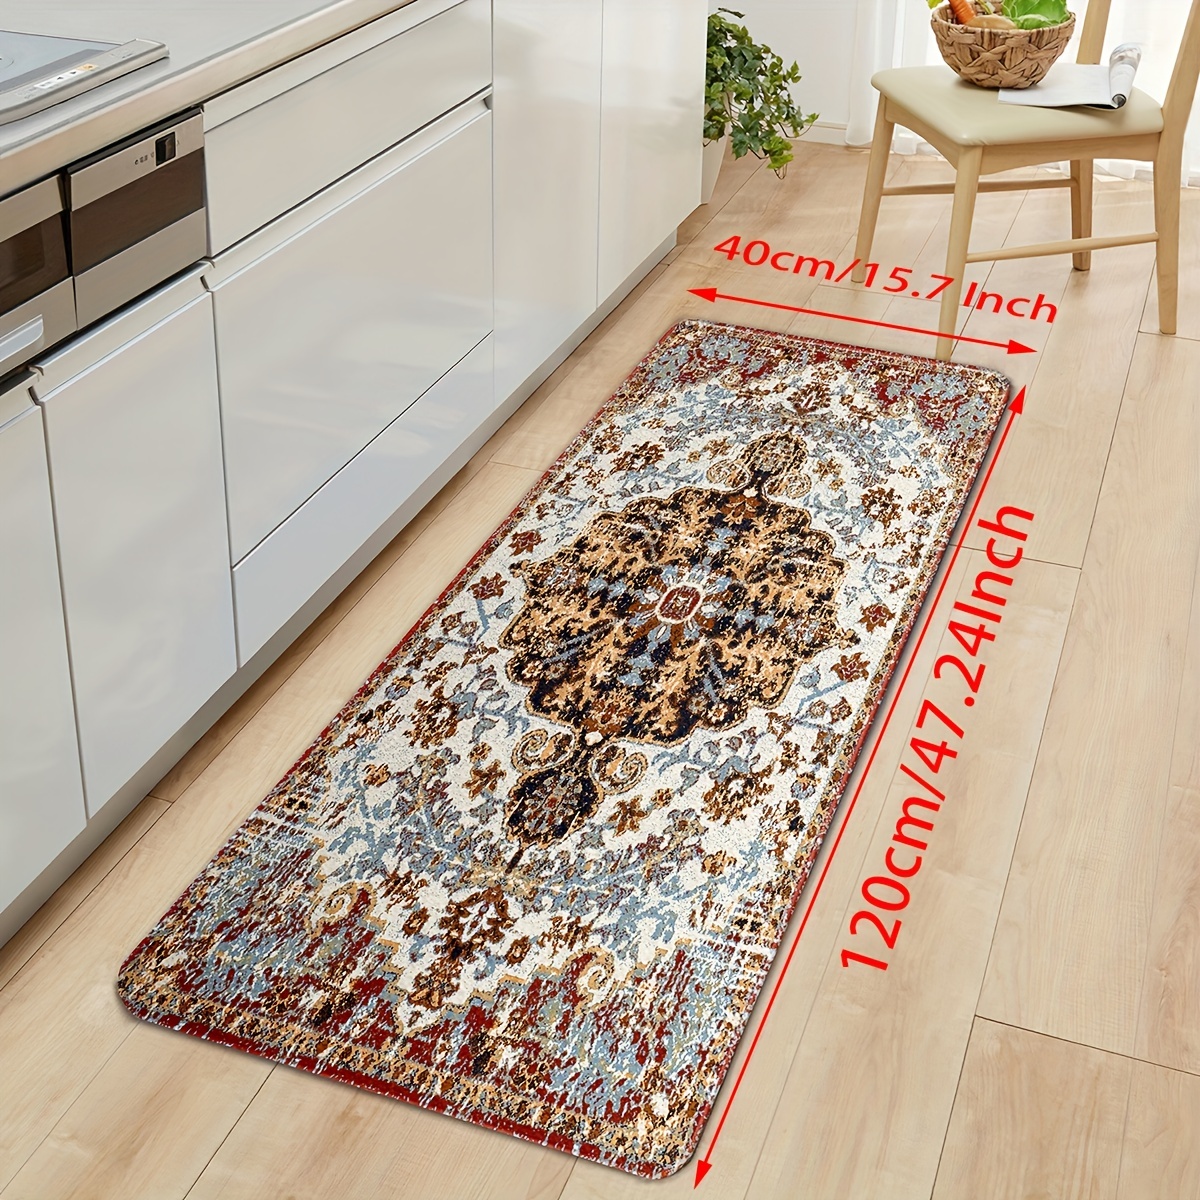 Linen Weave Kitchen Floor Mat Anti-slip Washed Rug Rubber Bottom Natural  Twill Flax Entry Door Long Carpet Oil-resistant Durable